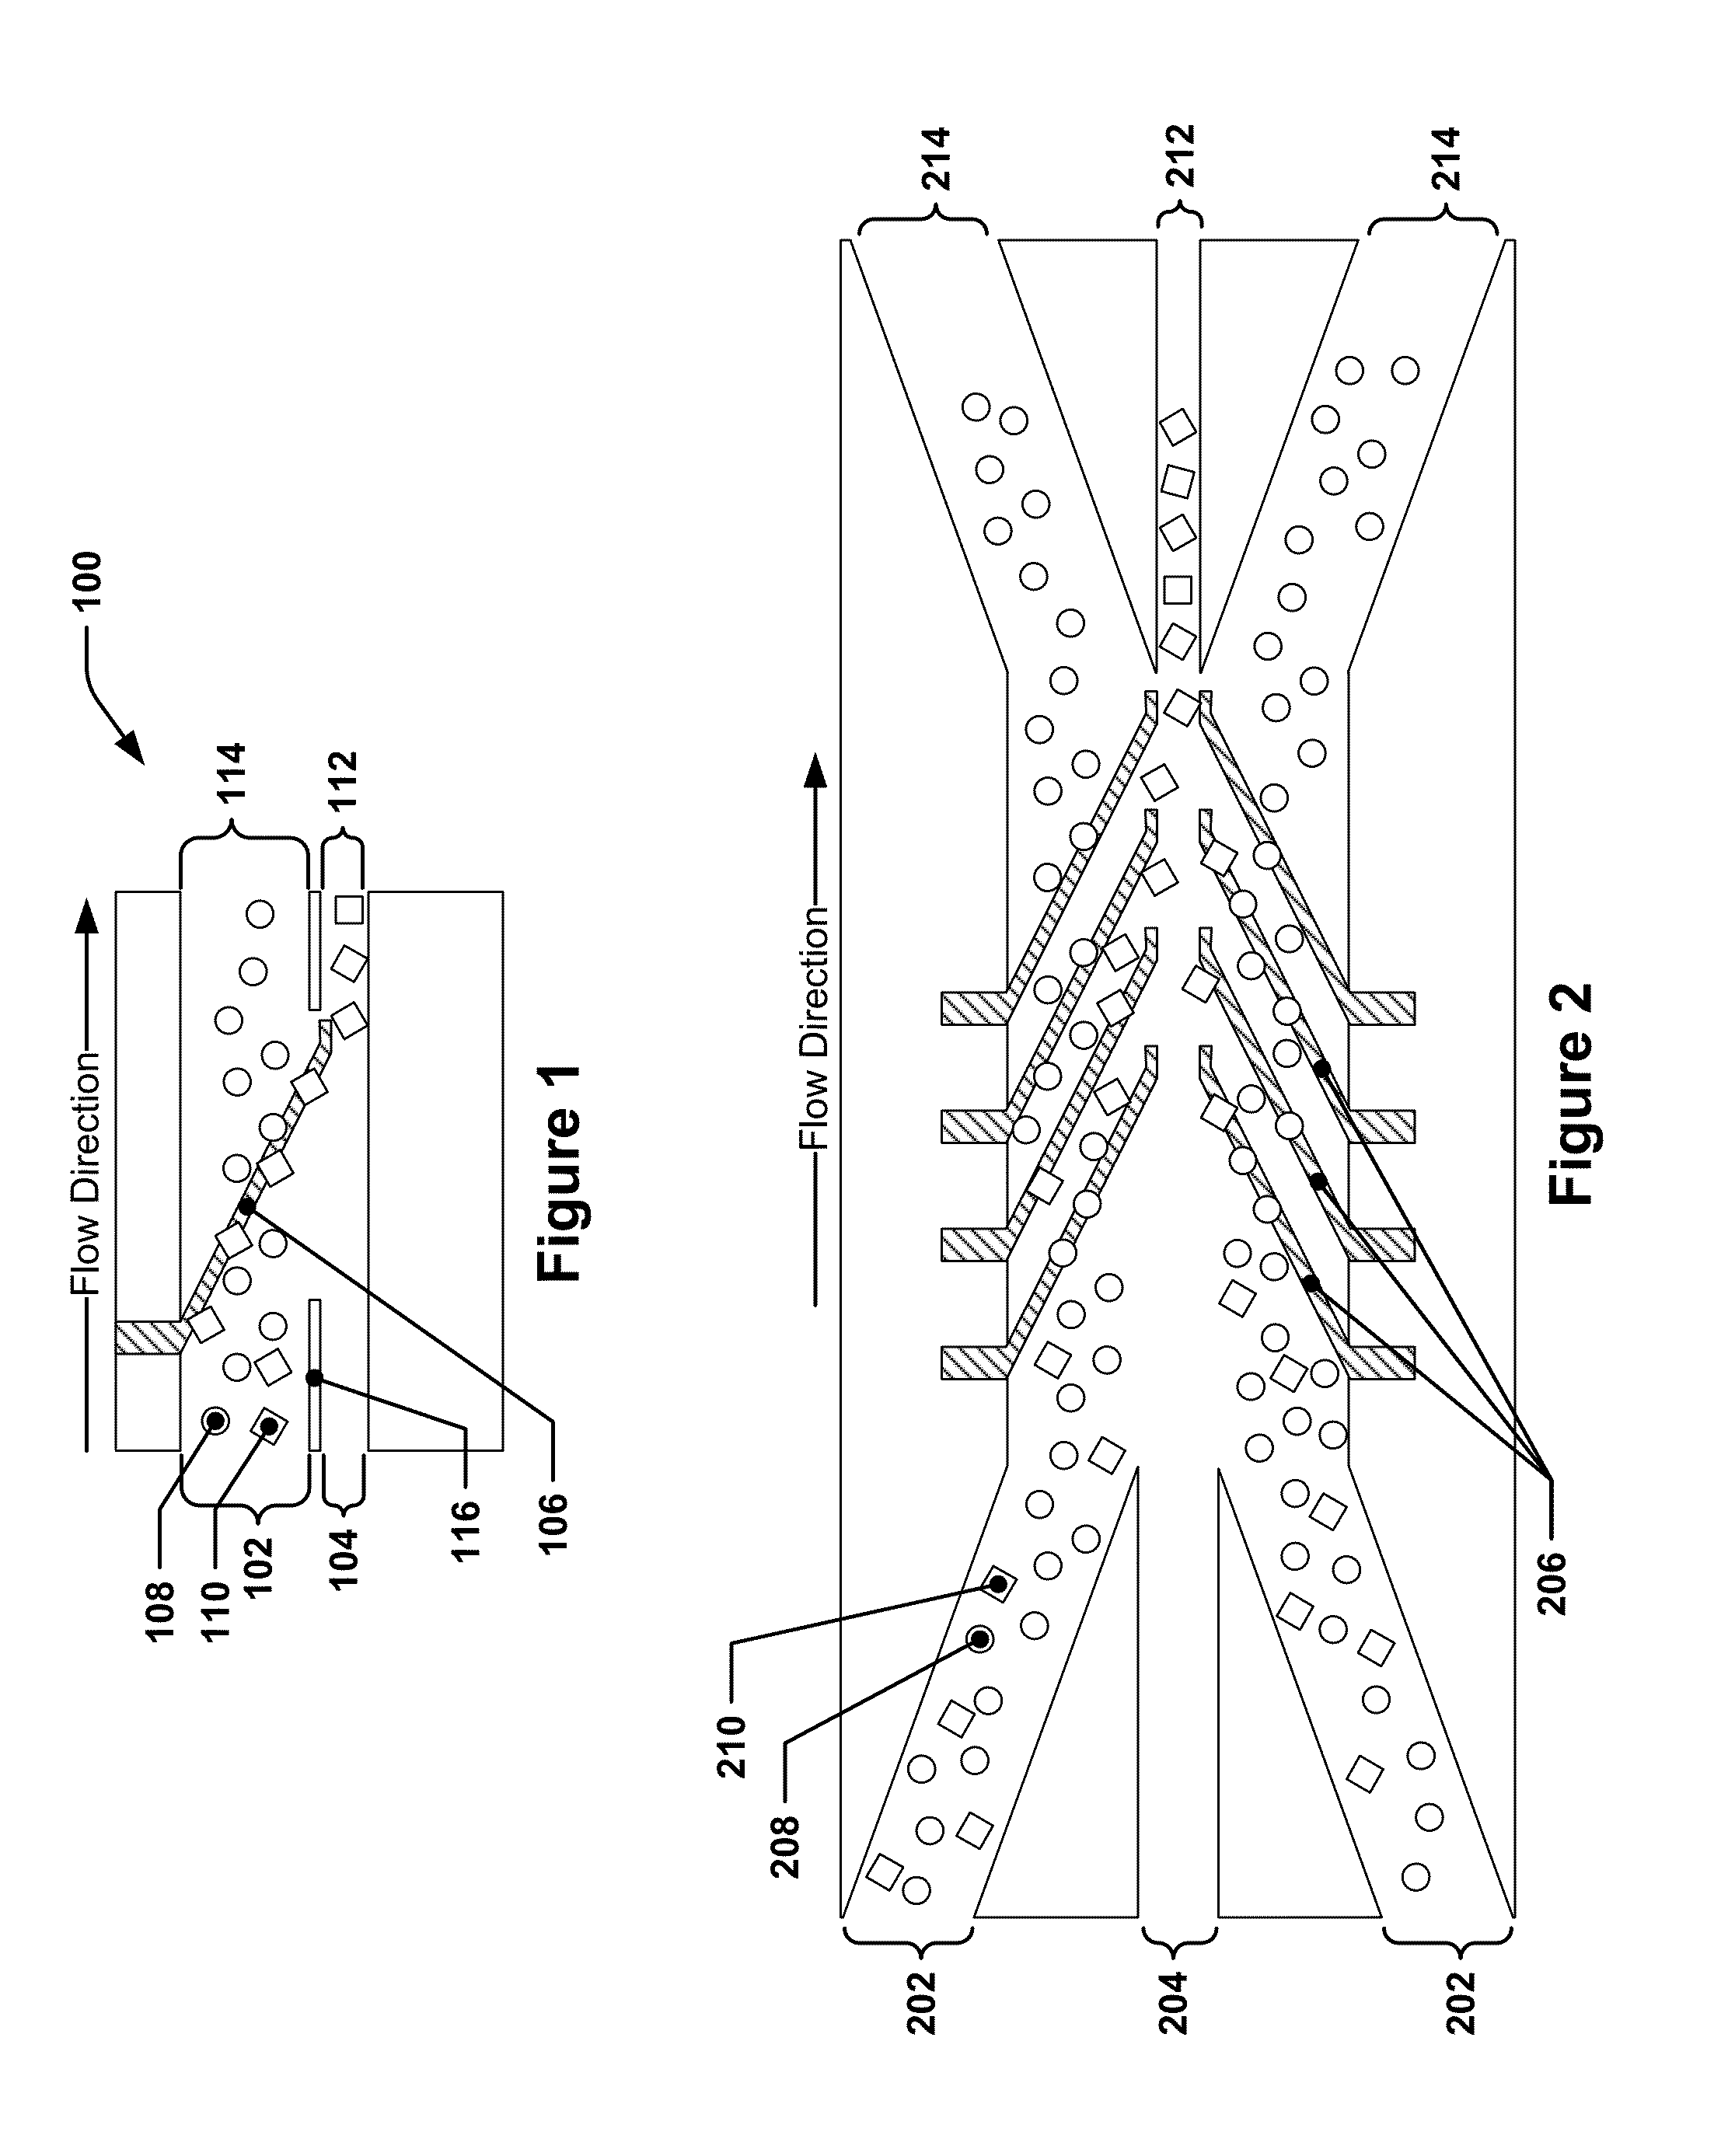 Continuous whole-chip 3-dimensional dep cell sorter and related fabrication method